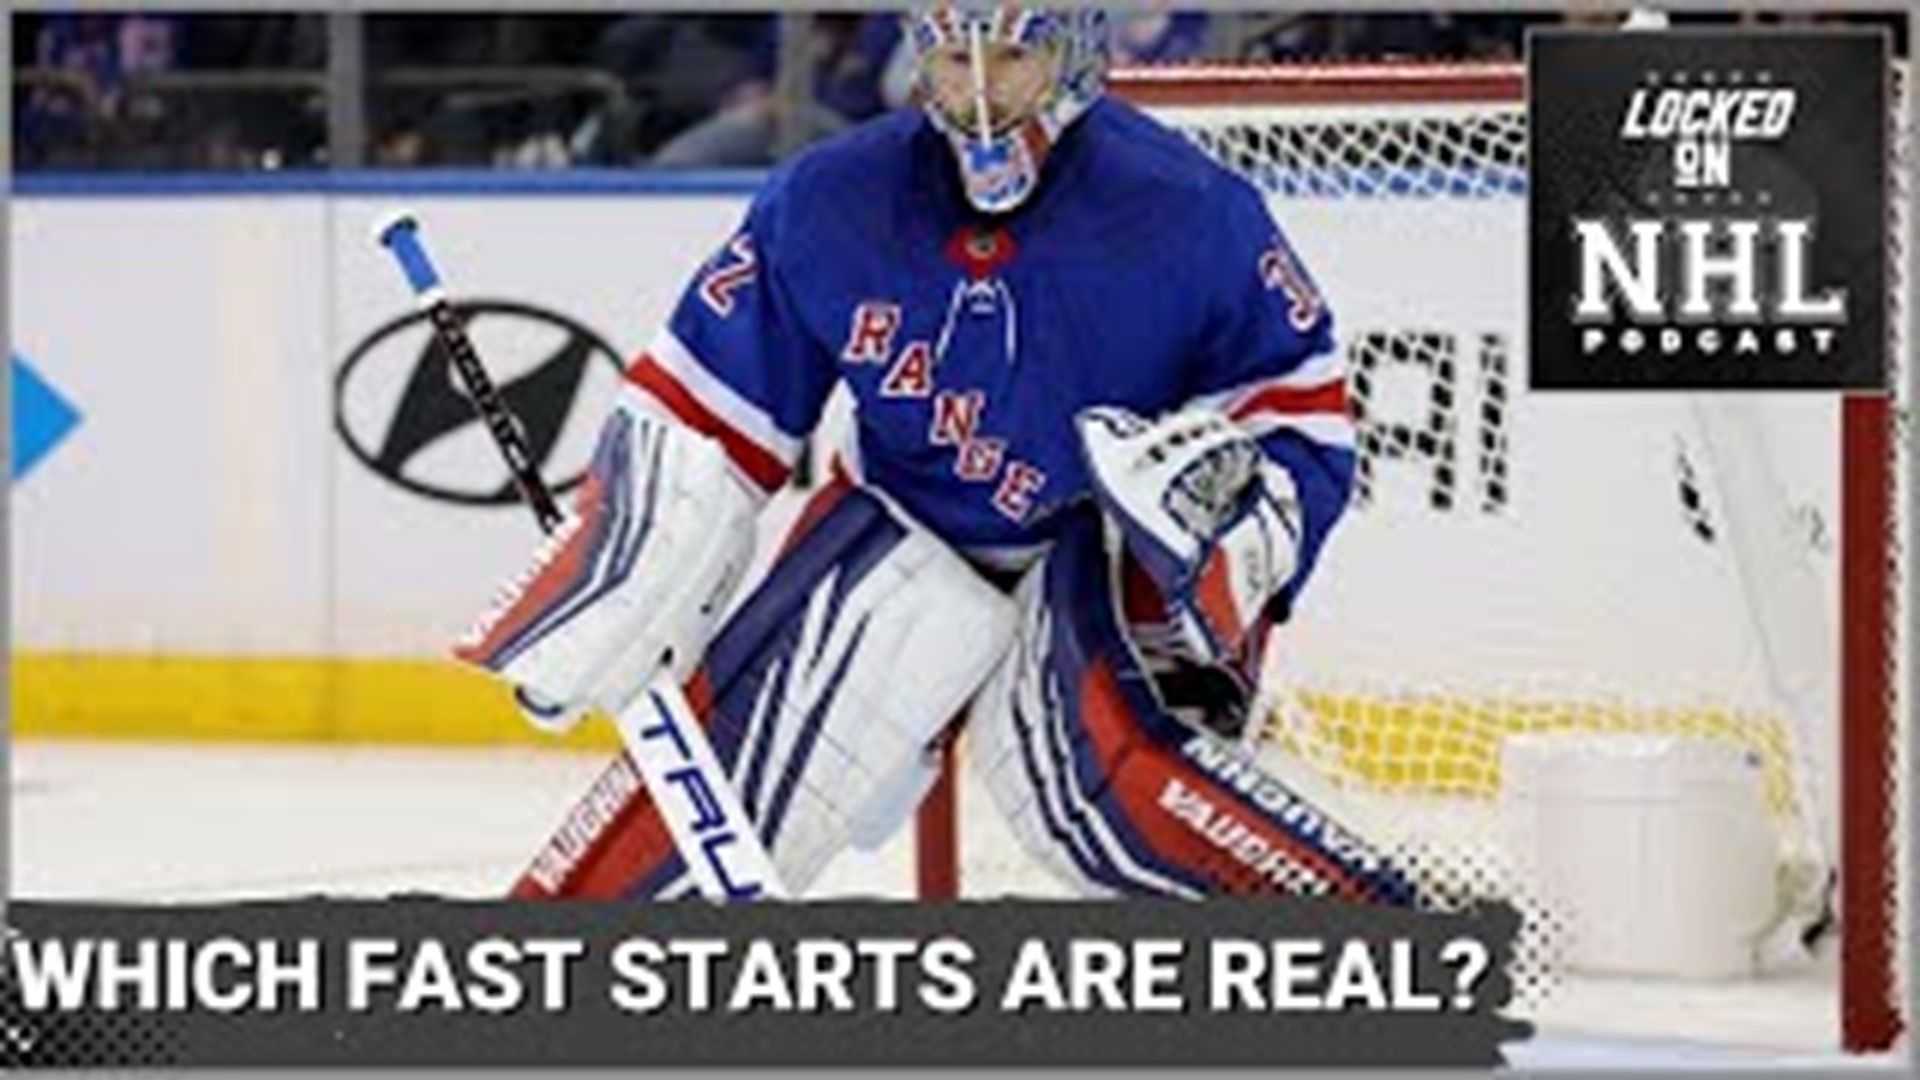 The New York Rangers are adjusting to new head coach Peter Laviolette as they look to find consistency.